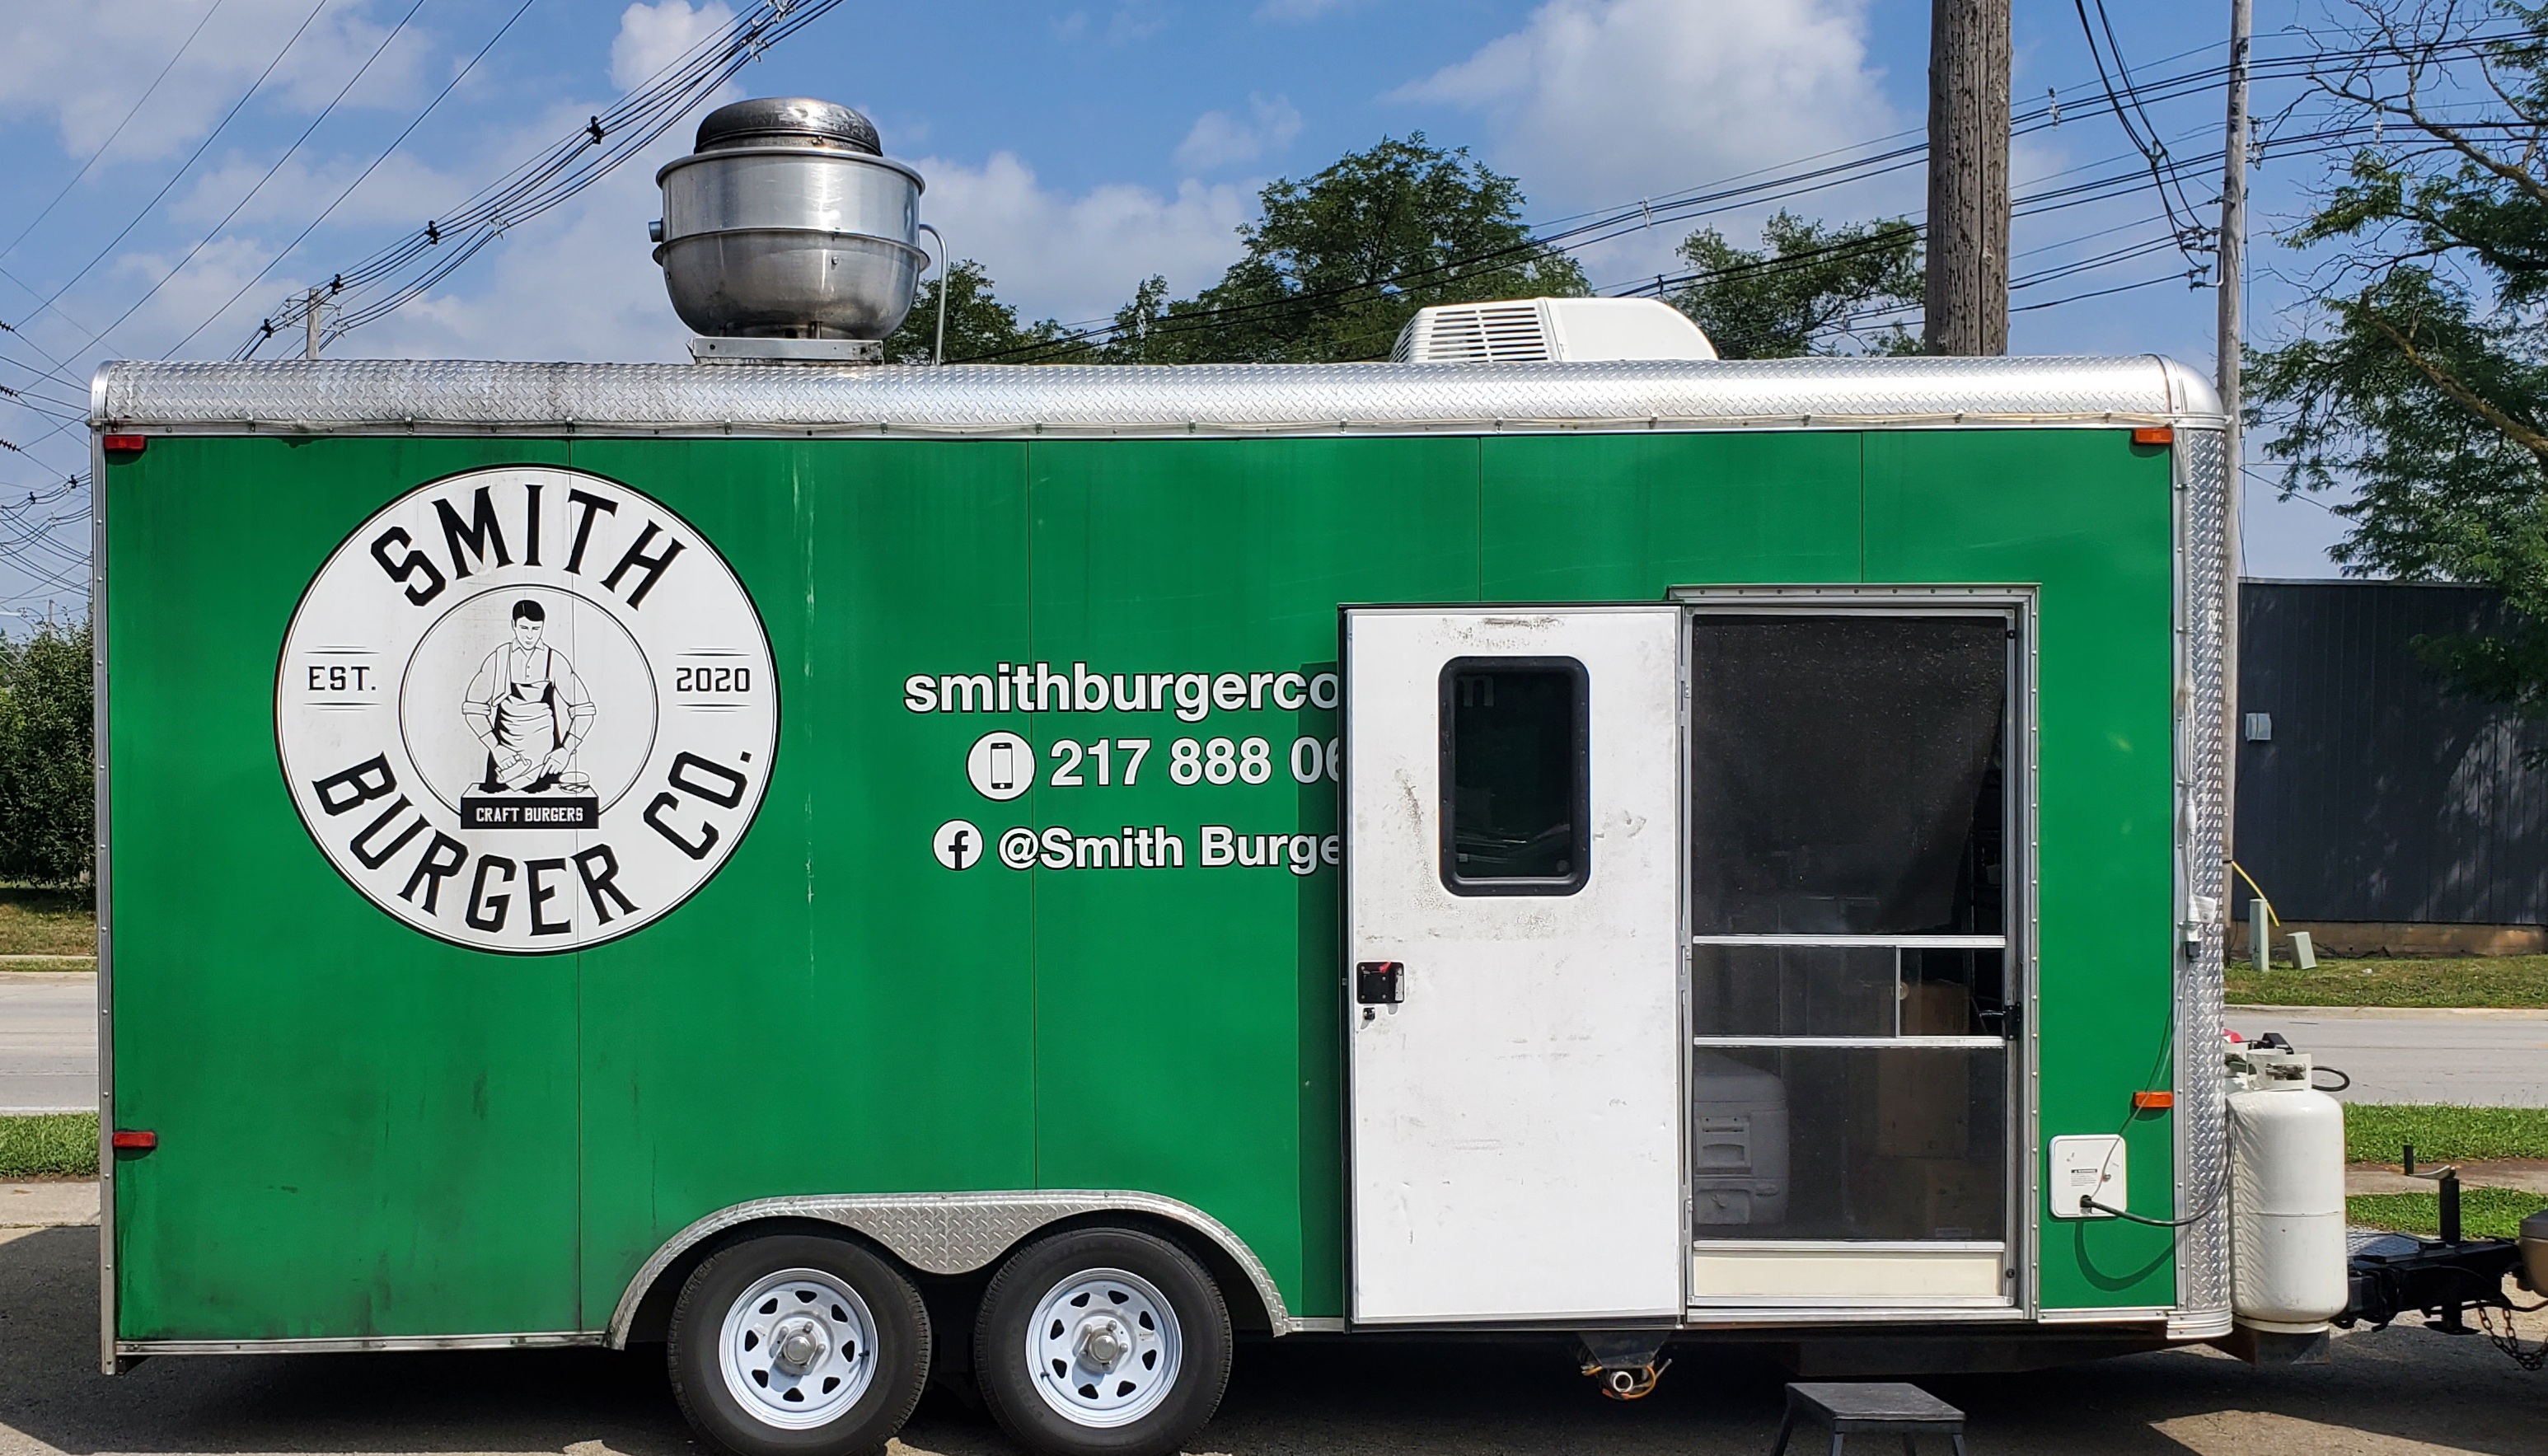 A green trailer for the food truck Smith Burger Co has the business' logo, phone number, and social media handles. Photo by Carl Busch.